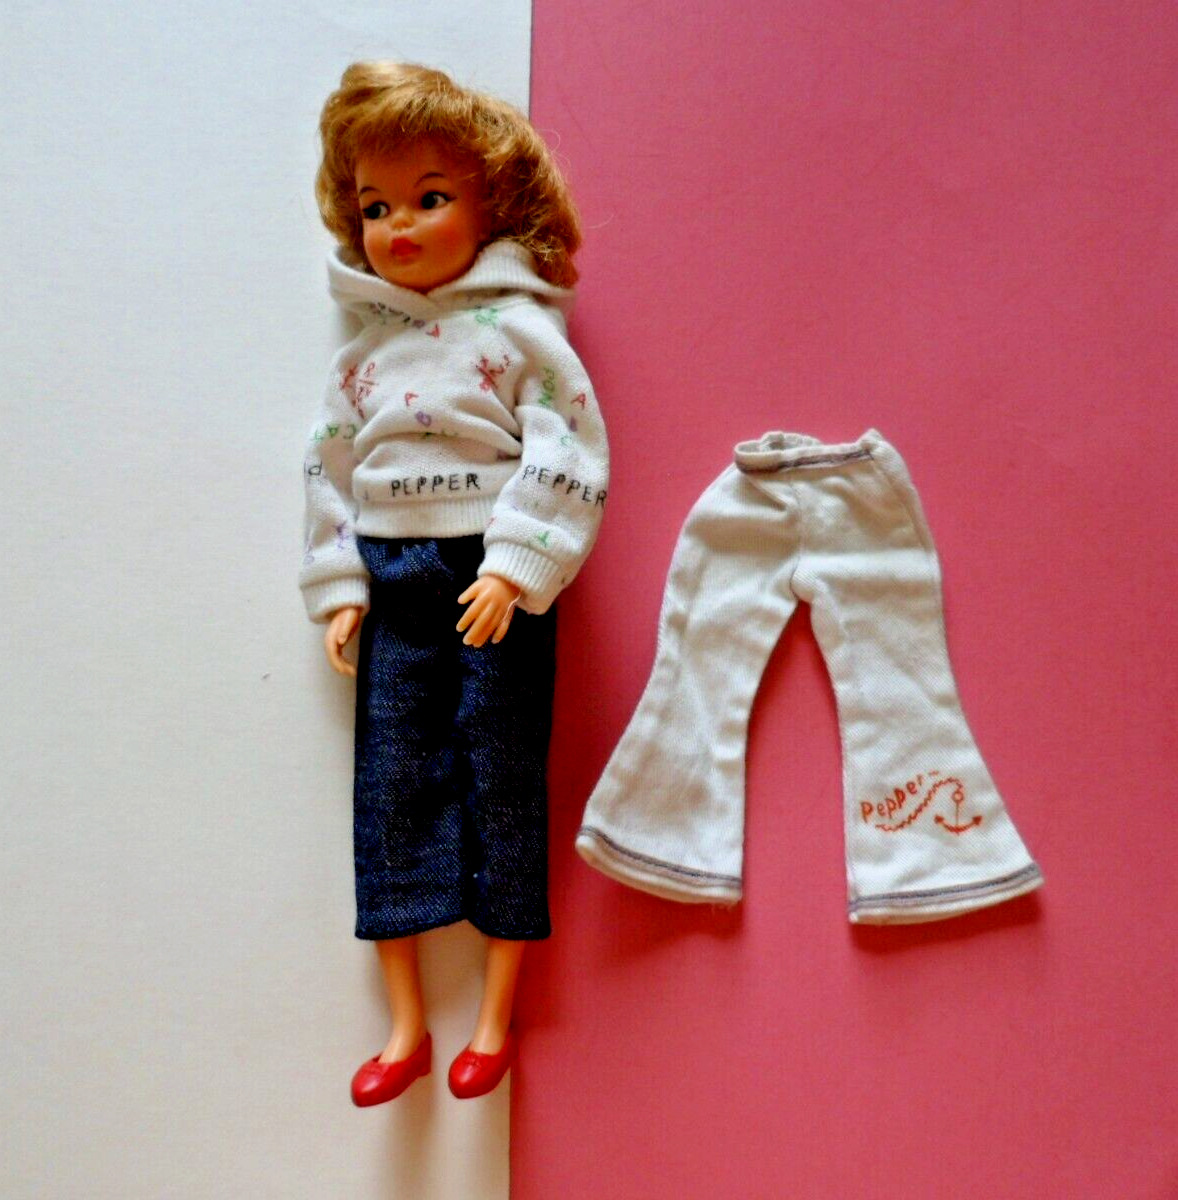 IDEAL POS'N PEPPER 1965 9405-2 TAMMY FAMILY SISTER 1960'S DOLL P9-3 OUTFIT SLACK